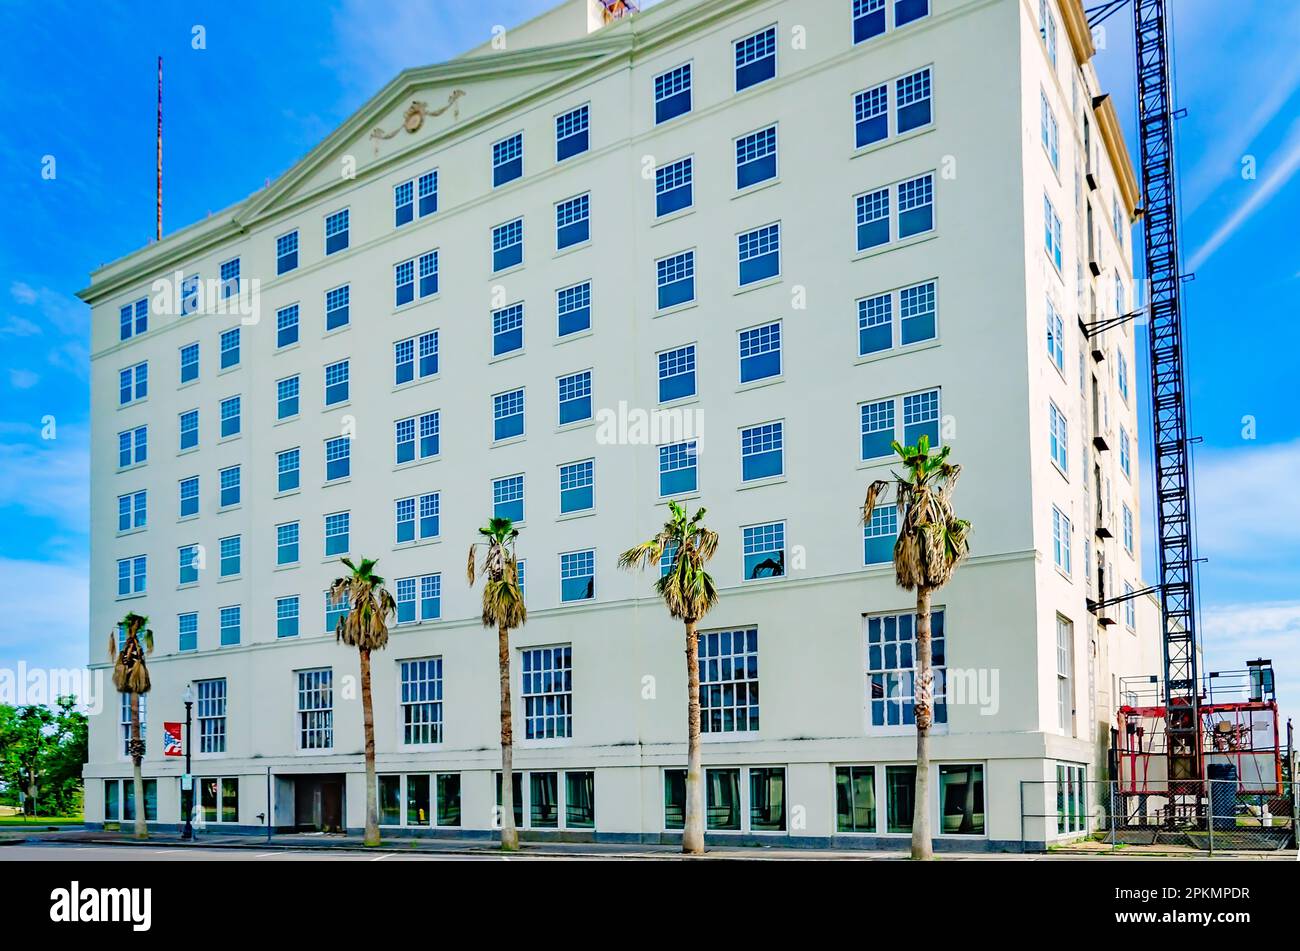 The old Markham Hotel is pictured, April 2, 2023, in Gulfport, Mississippi. The building was constructed in 1927 in the Tudor architectural style. Stock Photo